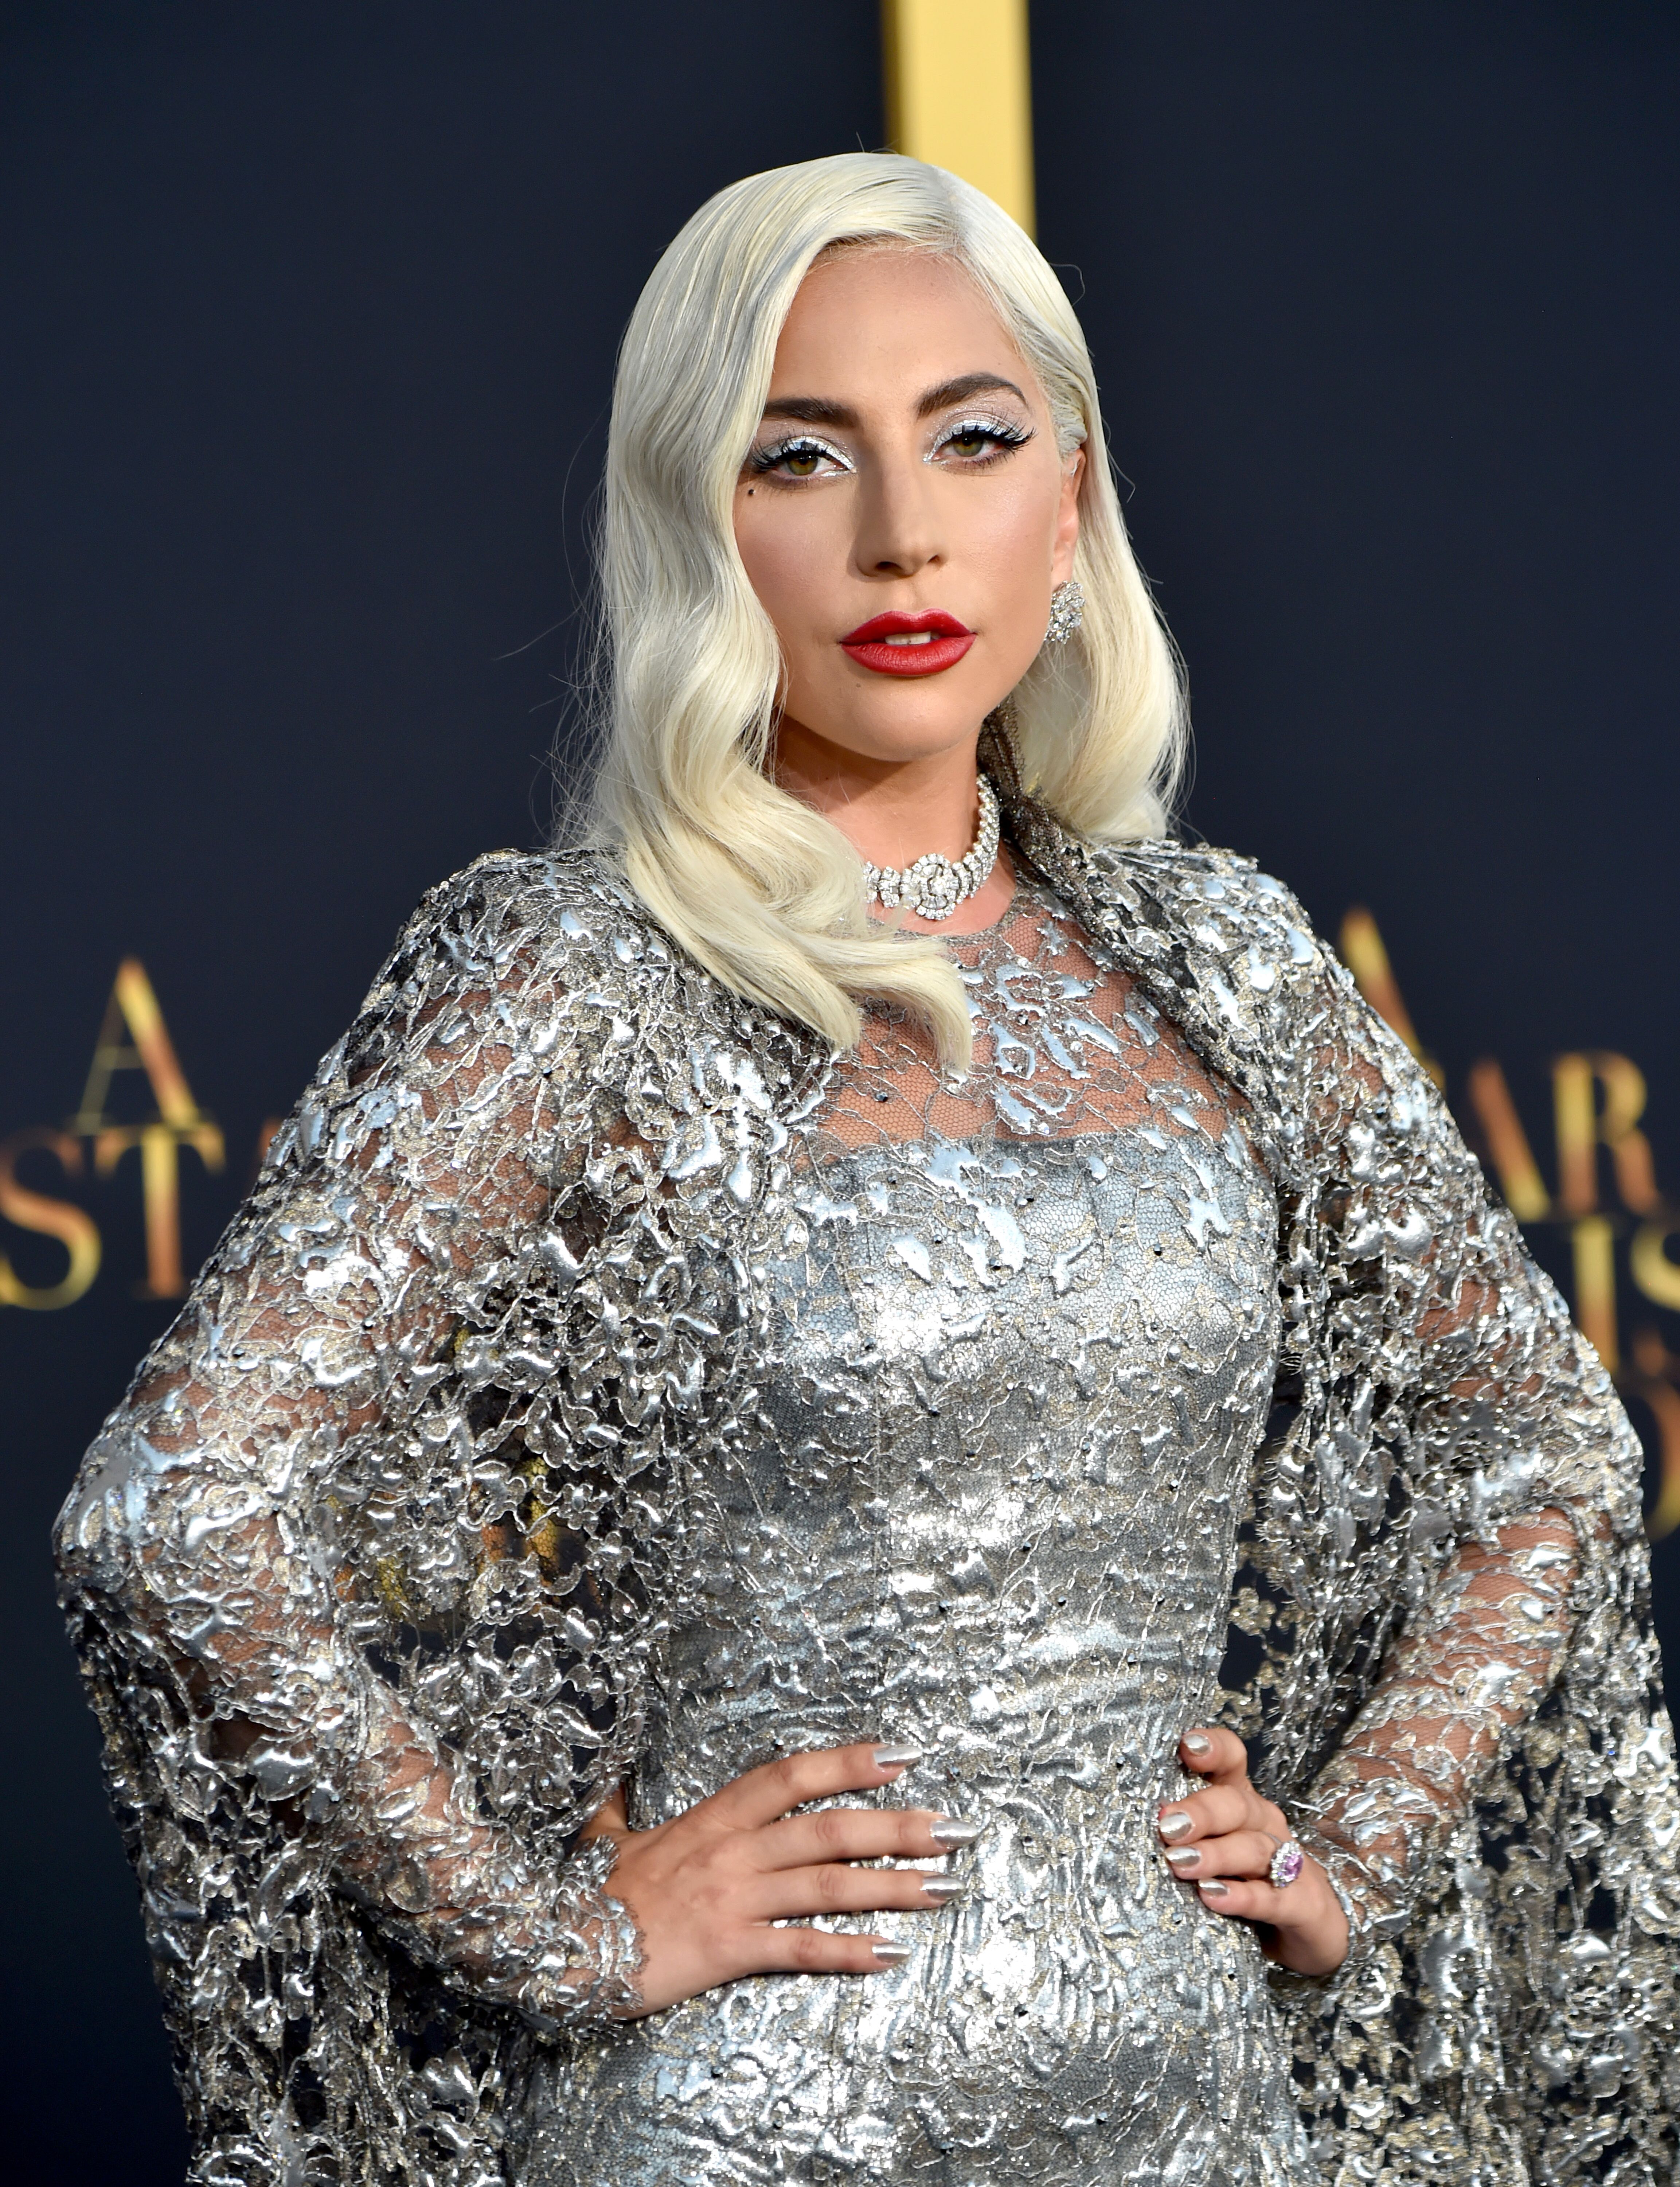 Lady Gaga at the premiere of 'A Star Is Born' at The Shrine Auditorium on September 24, 2018, in Los Angeles, California | Photo: Getty Images